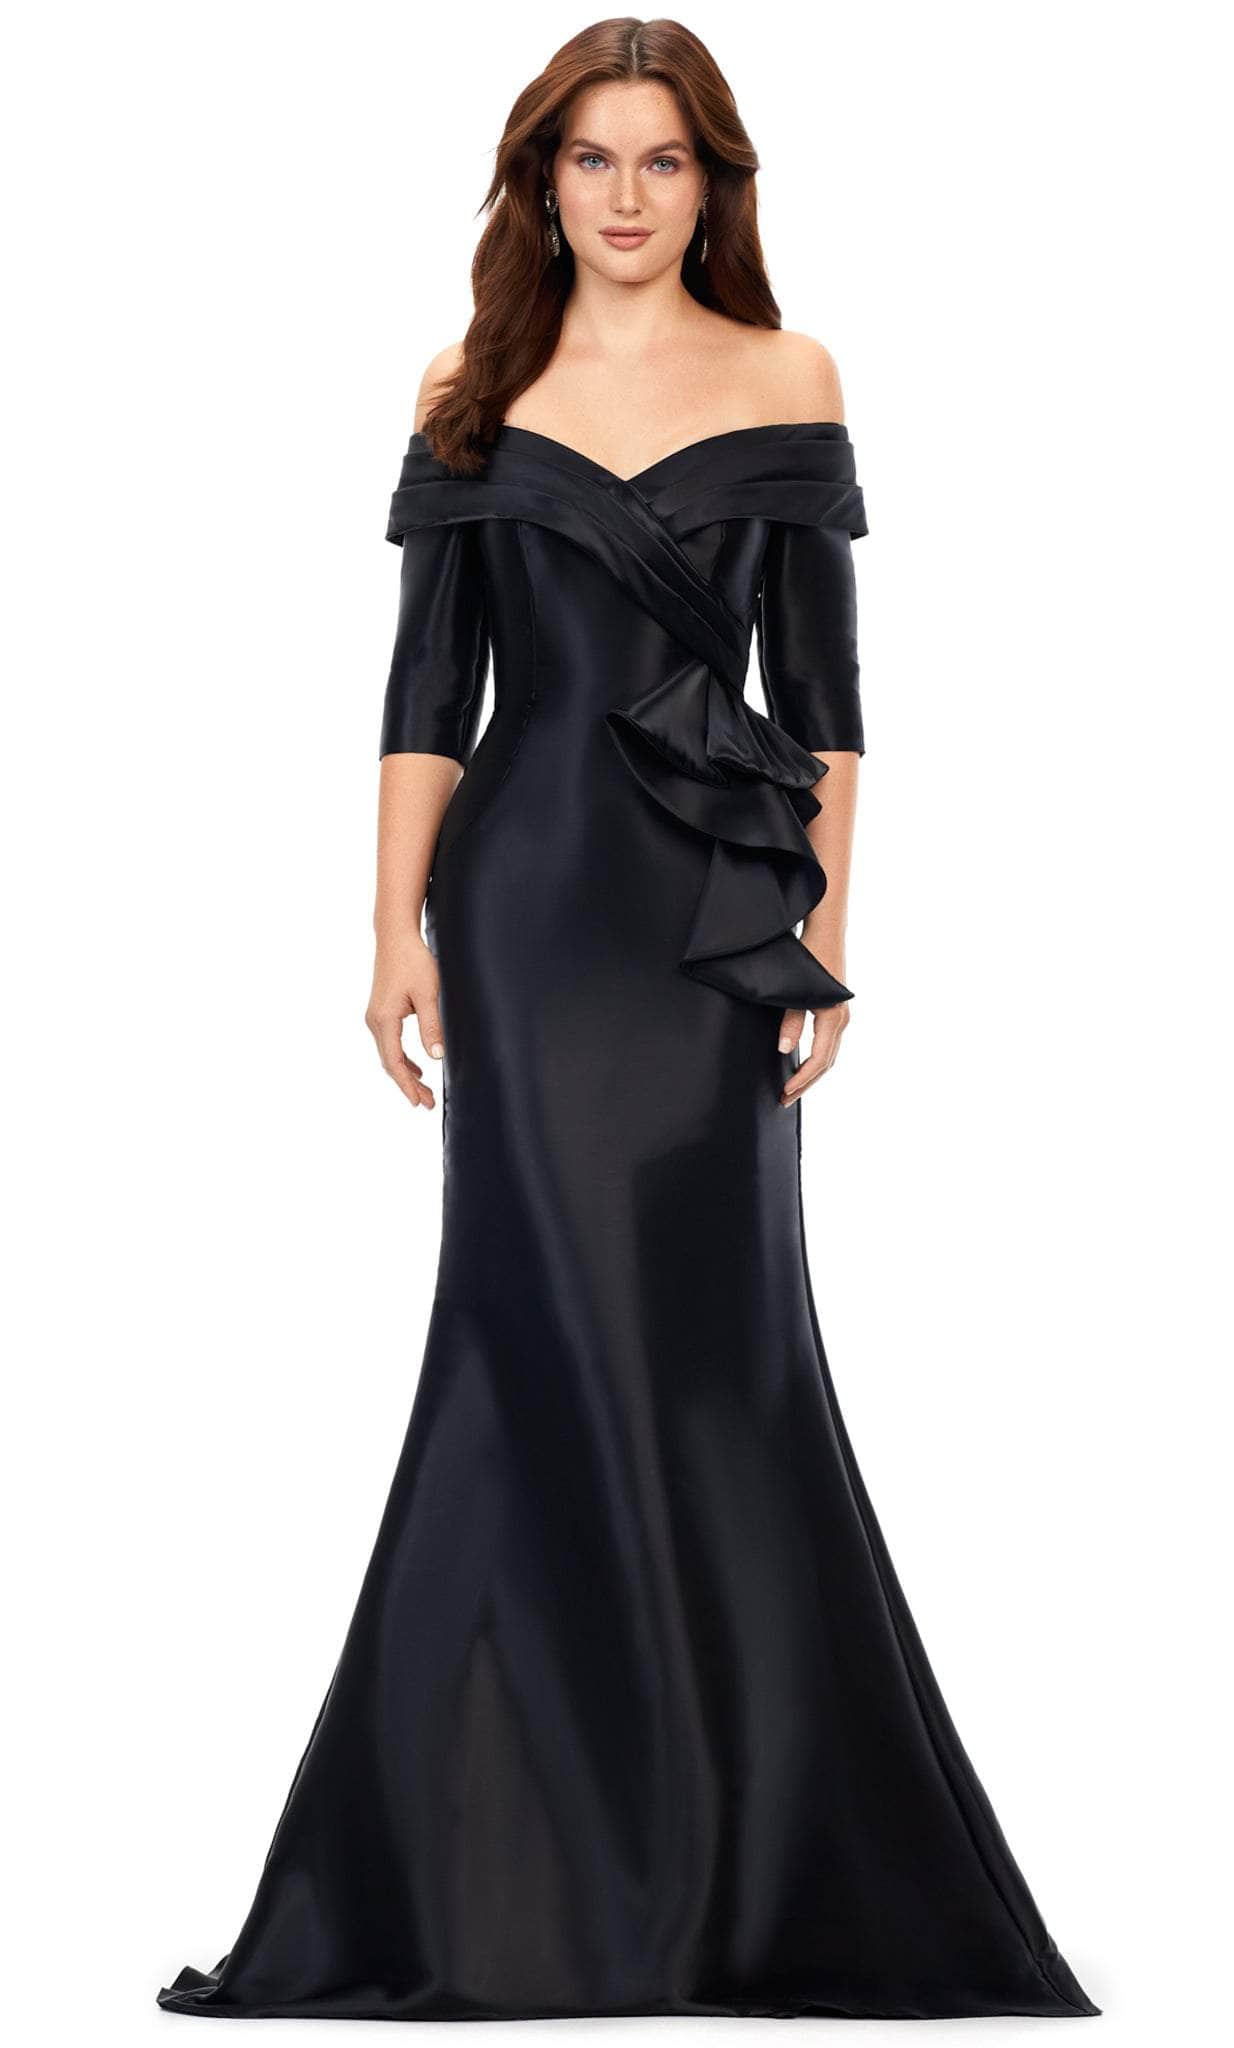 Image of Ashley Lauren 11324 - Pleated Off Shoulder Evening Gown